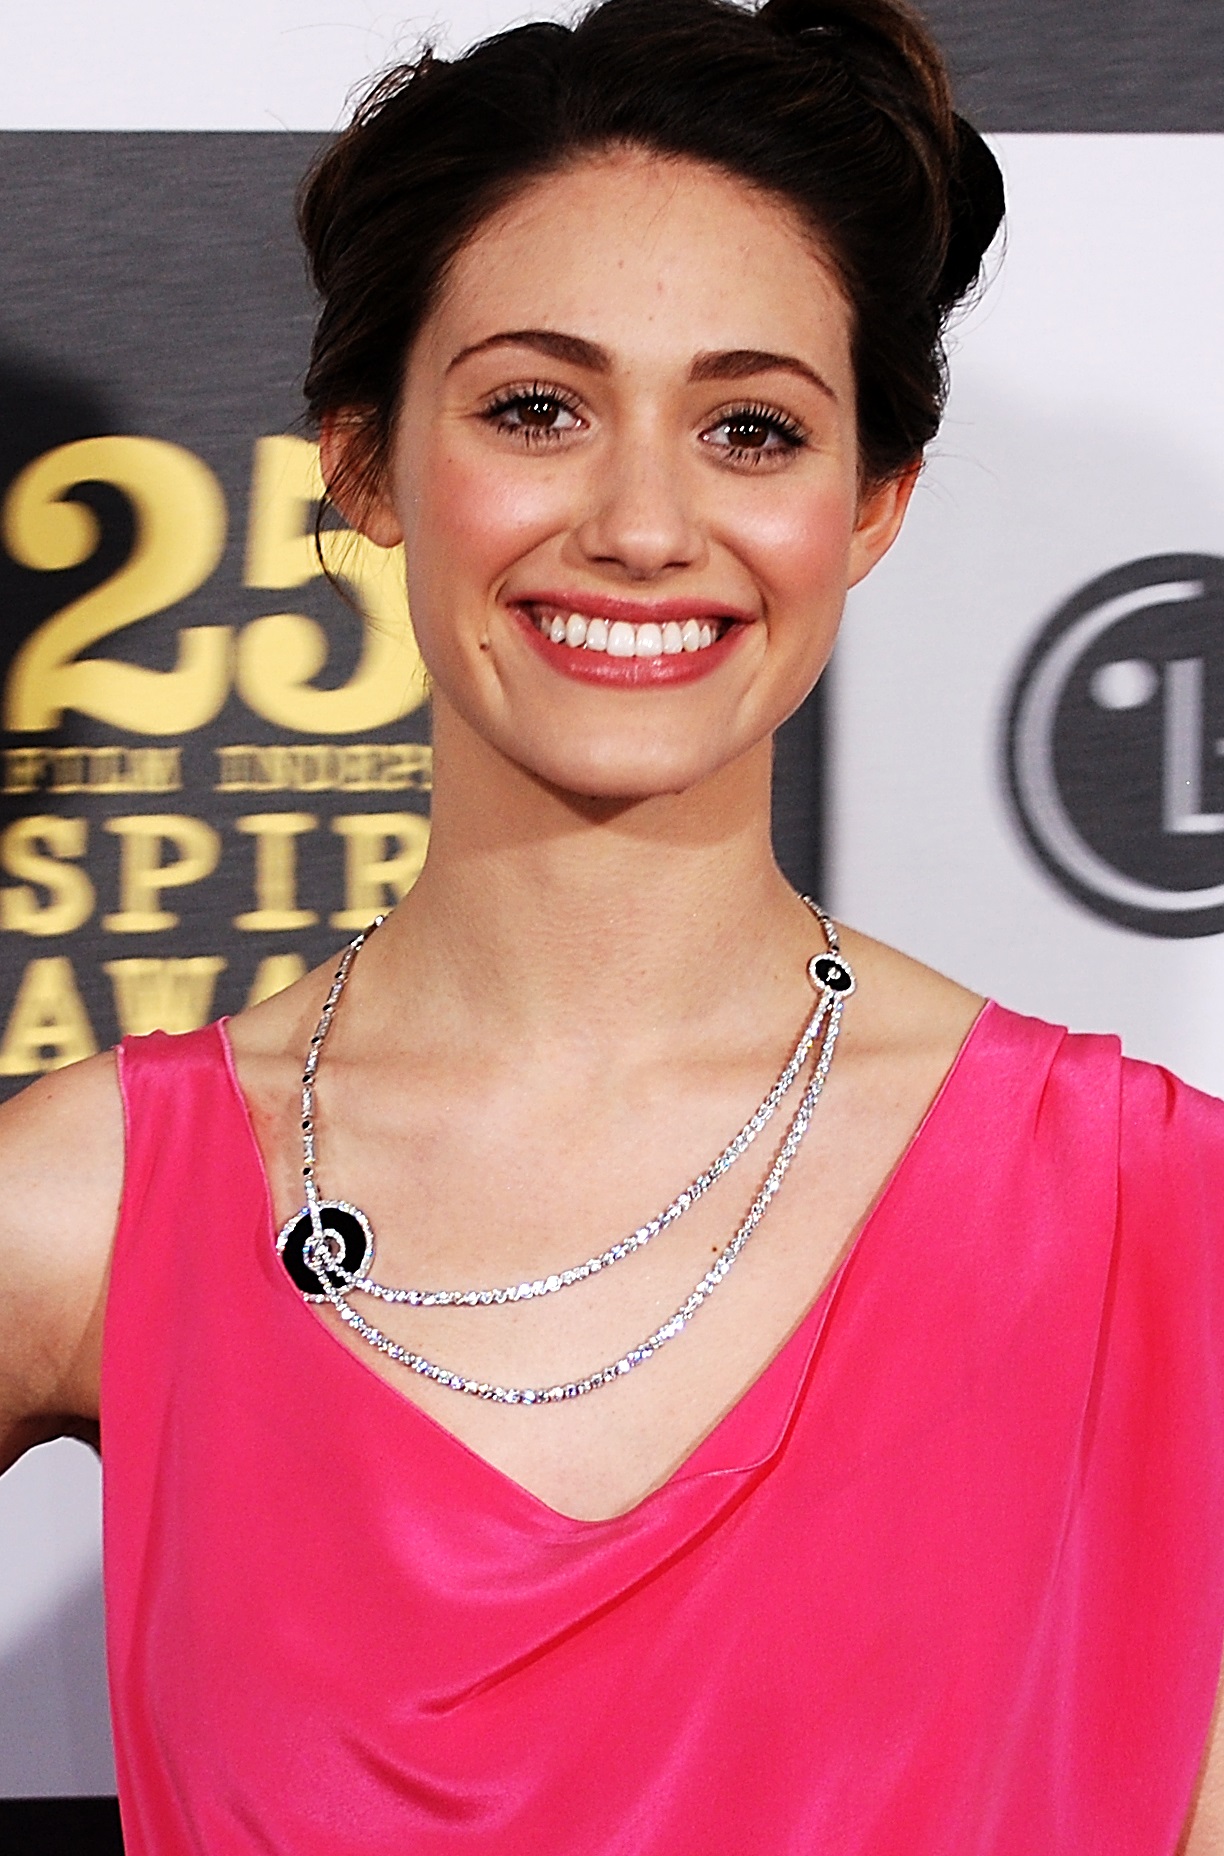 The 36-year old daughter of father (?) and mother Cheryl Rossum Emmy Rossum in 2023 photo. Emmy Rossum earned a  million dollar salary - leaving the net worth at 10 million in 2023